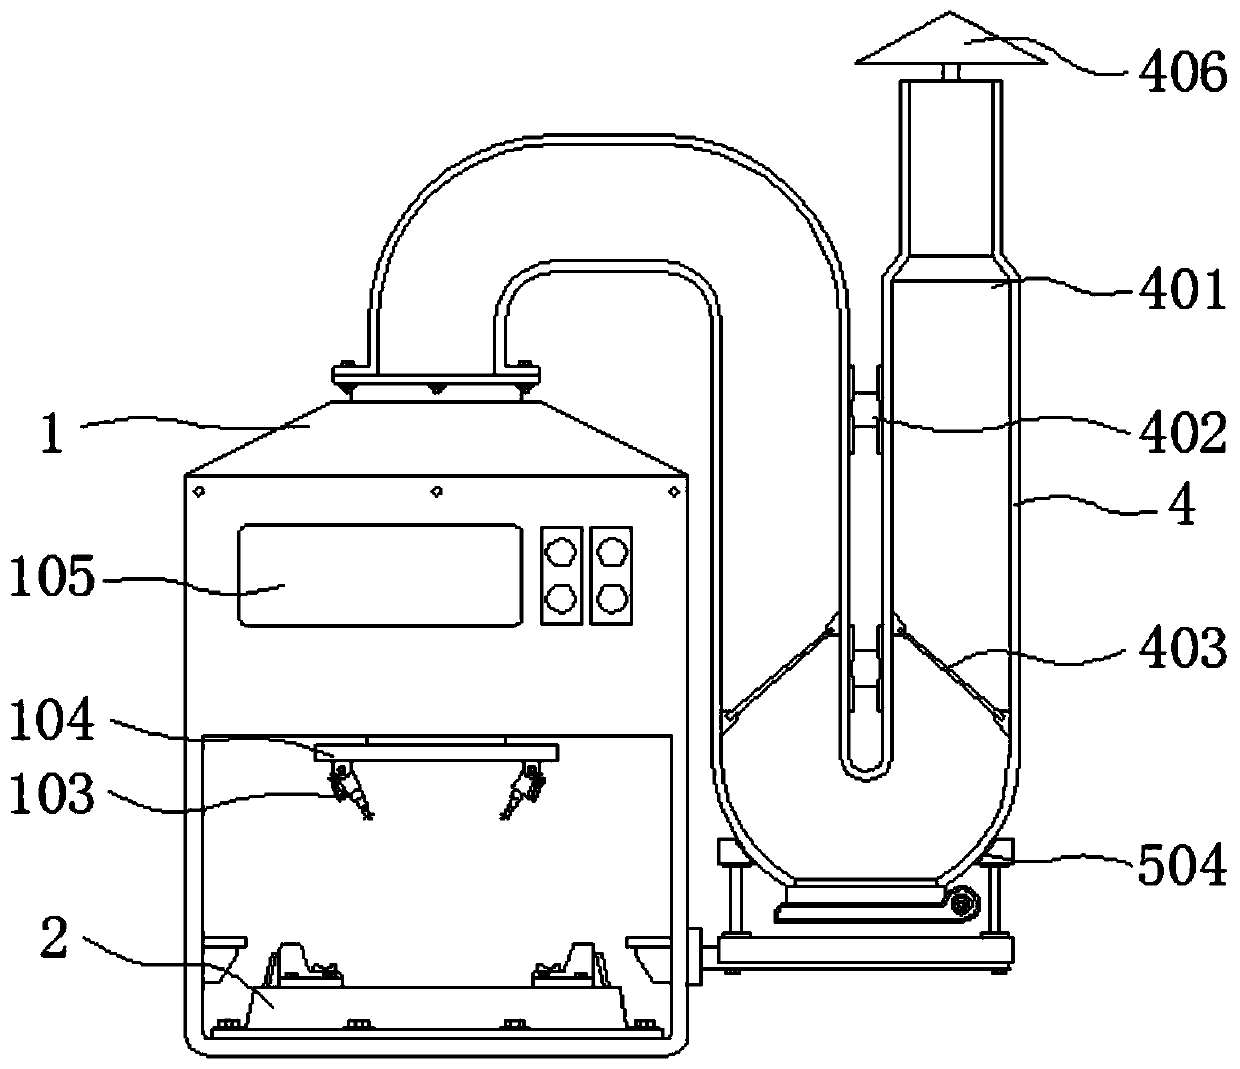 Environment-friendly garbage incineration treatment device with waste gas treatment function